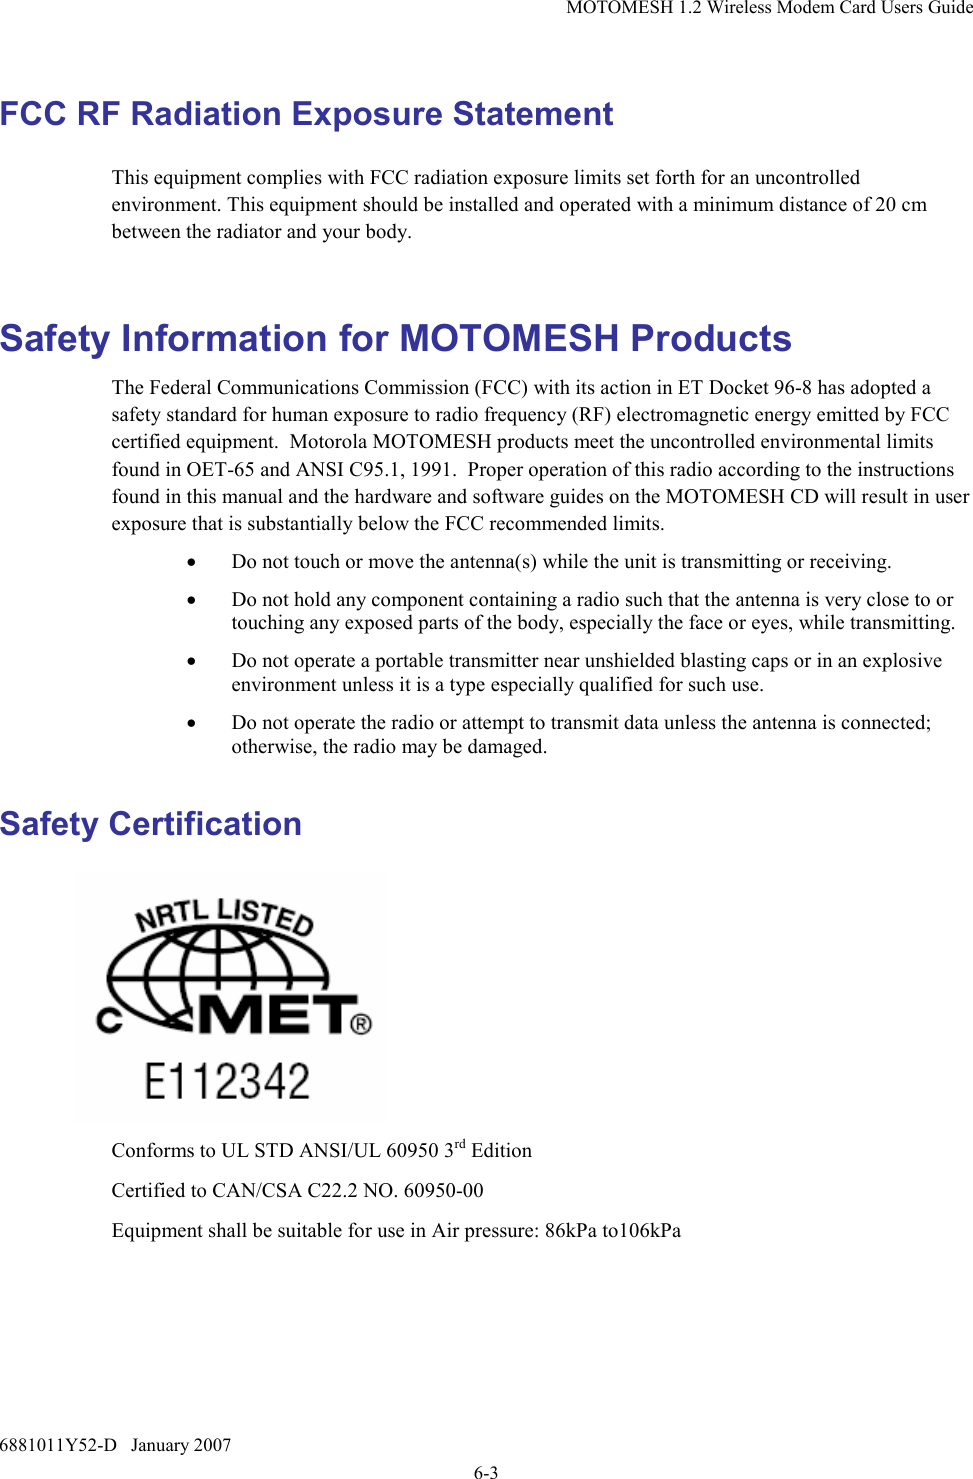 MOTOMESH 1.2 Wireless Modem Card Users Guide 6881011Y52-D   January 2007 6-3 FCC RF Radiation Exposure Statement This equipment complies with FCC radiation exposure limits set forth for an uncontrolled environment. This equipment should be installed and operated with a minimum distance of 20 cm between the radiator and your body.  Safety Information for MOTOMESH Products The Federal Communications Commission (FCC) with its action in ET Docket 96-8 has adopted a safety standard for human exposure to radio frequency (RF) electromagnetic energy emitted by FCC certified equipment.  Motorola MOTOMESH products meet the uncontrolled environmental limits found in OET-65 and ANSI C95.1, 1991.  Proper operation of this radio according to the instructions found in this manual and the hardware and software guides on the MOTOMESH CD will result in user exposure that is substantially below the FCC recommended limits.  • Do not touch or move the antenna(s) while the unit is transmitting or receiving. • Do not hold any component containing a radio such that the antenna is very close to or touching any exposed parts of the body, especially the face or eyes, while transmitting. • Do not operate a portable transmitter near unshielded blasting caps or in an explosive environment unless it is a type especially qualified for such use. • Do not operate the radio or attempt to transmit data unless the antenna is connected; otherwise, the radio may be damaged. Safety Certification   Conforms to UL STD ANSI/UL 60950 3rd Edition  Certified to CAN/CSA C22.2 NO. 60950-00 Equipment shall be suitable for use in Air pressure: 86kPa to106kPa 